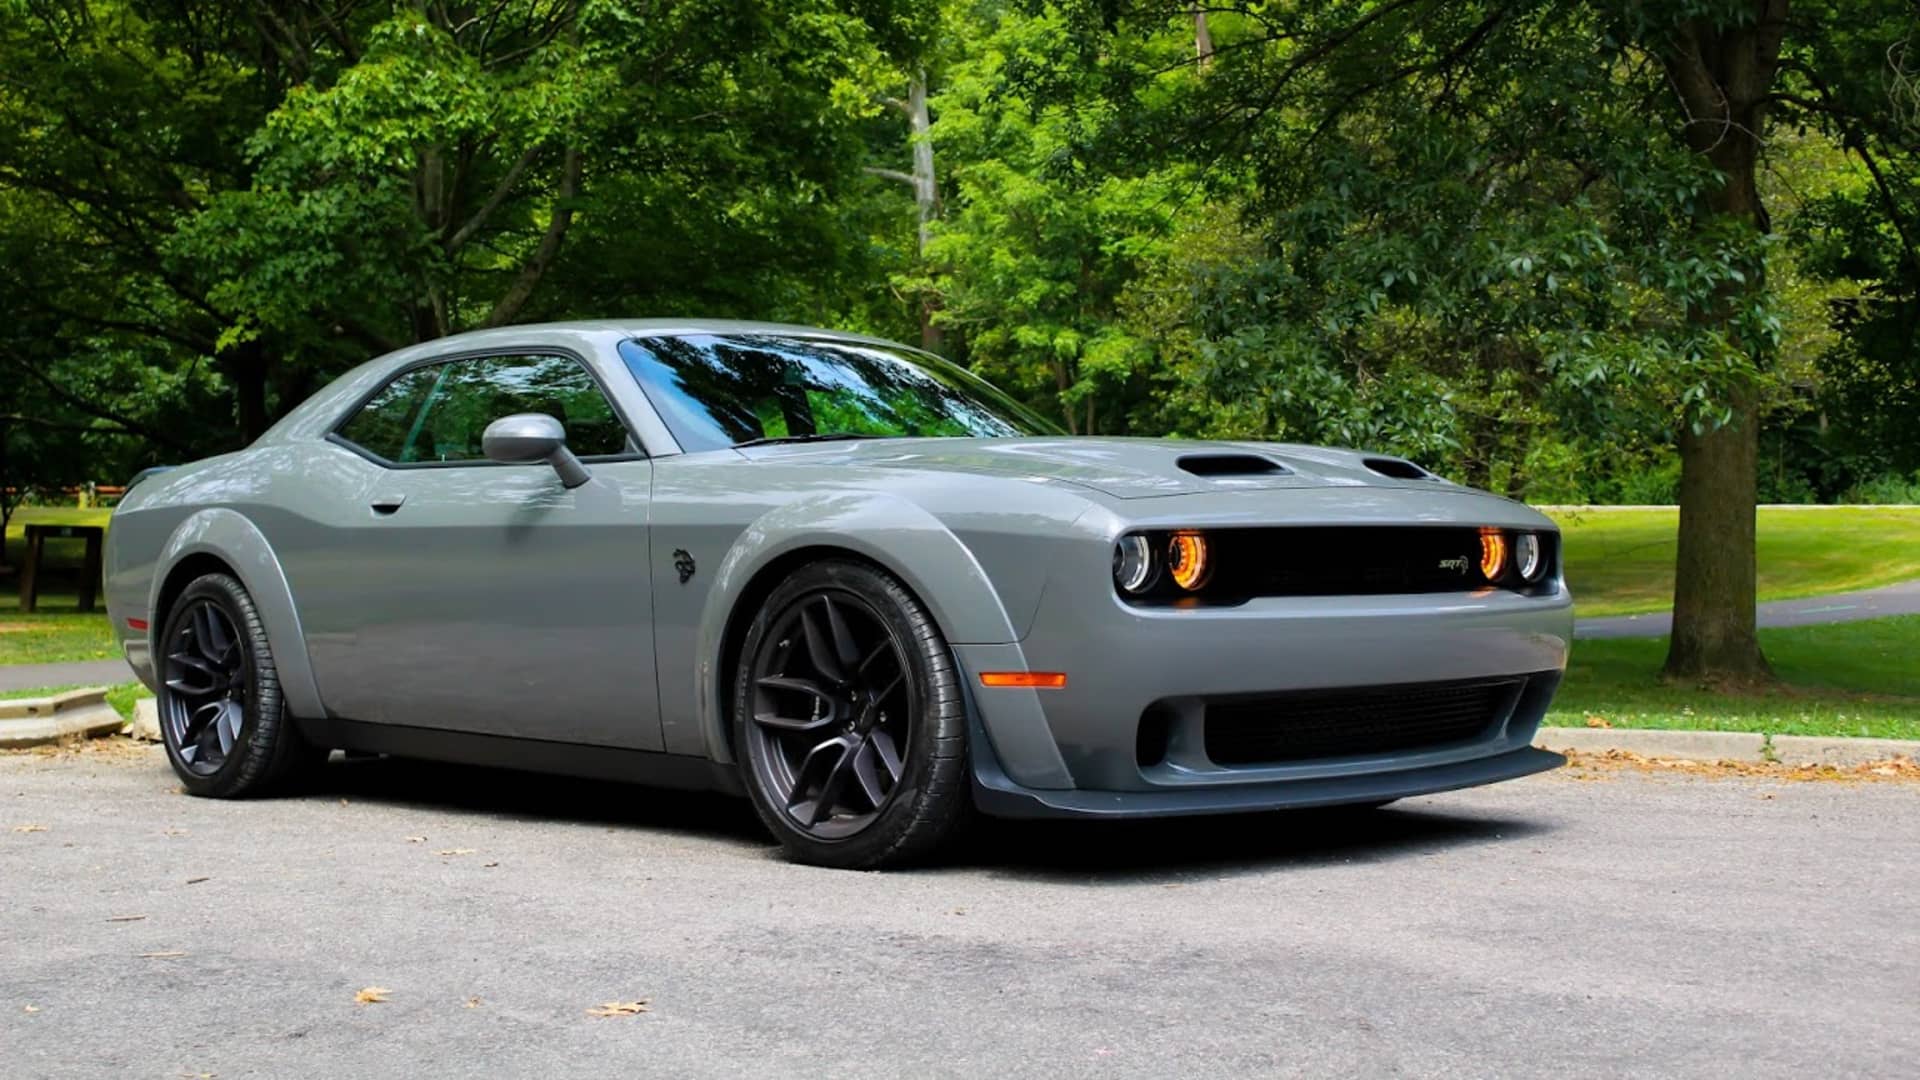 Review The Dodge Challenger Srt Hellcat Redeye Is An Intoxicating